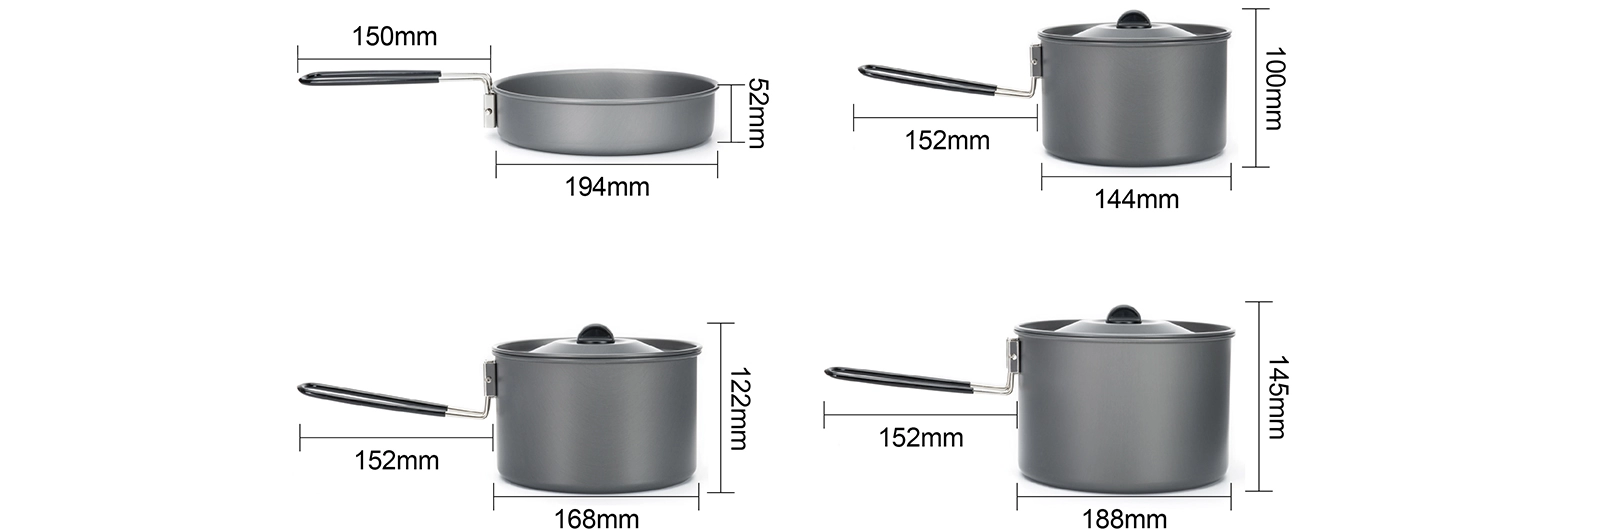 details of Outdoor Essential Cook Set for Group Camping